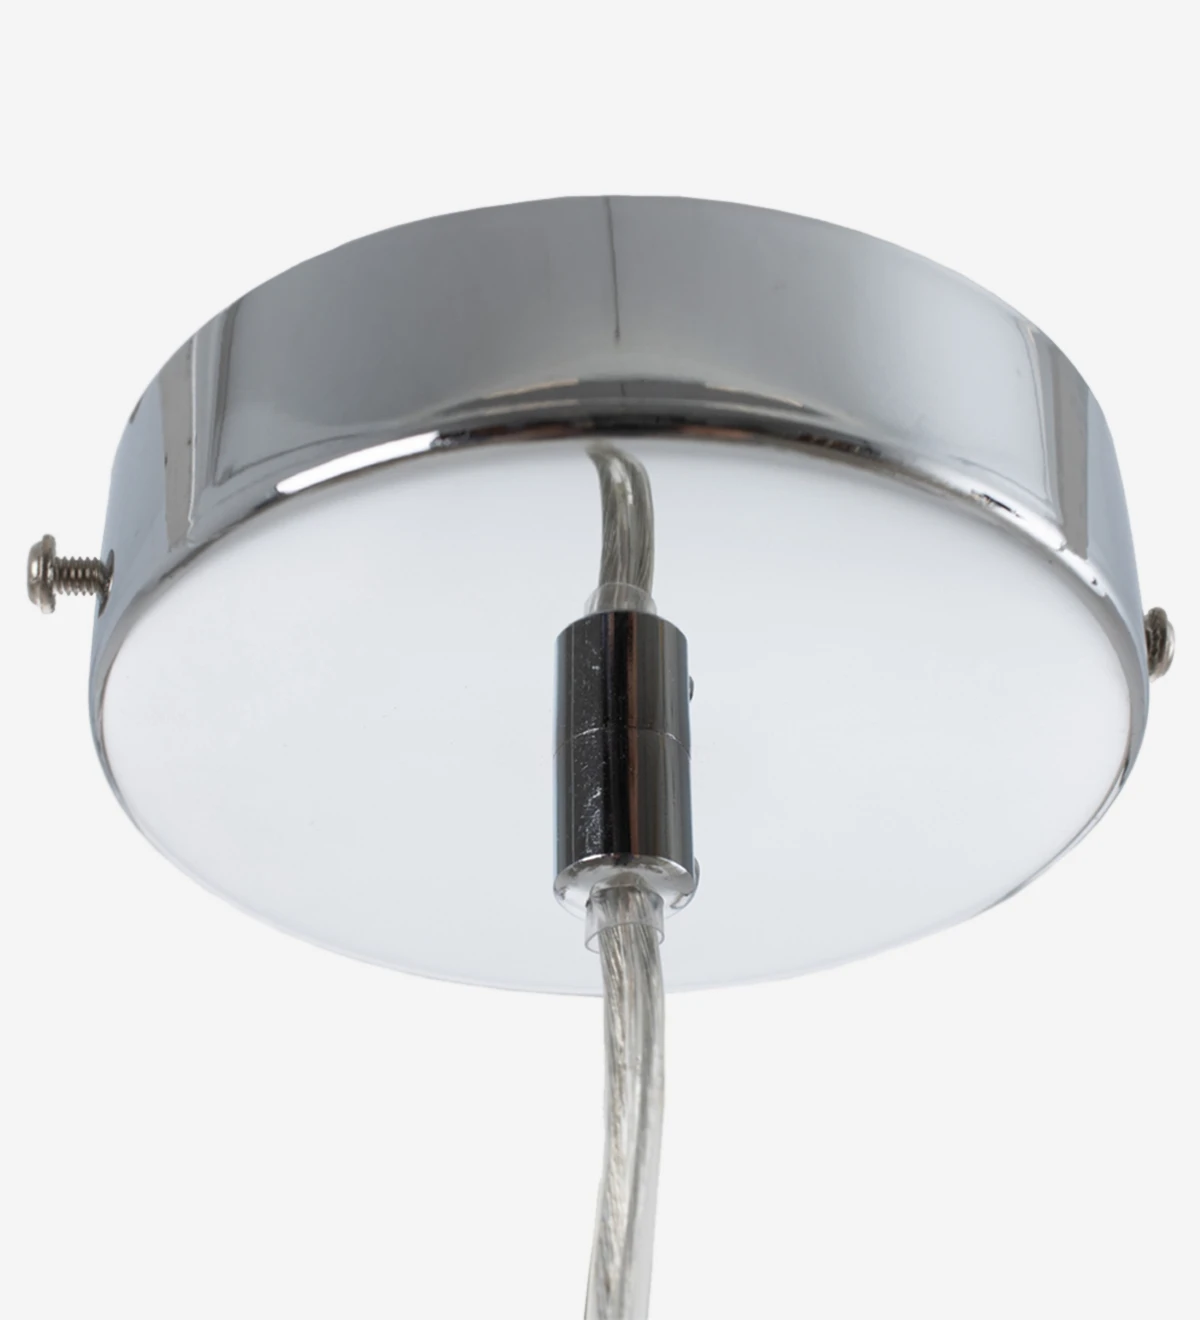 Suspended ceiling lamp in silver and glass